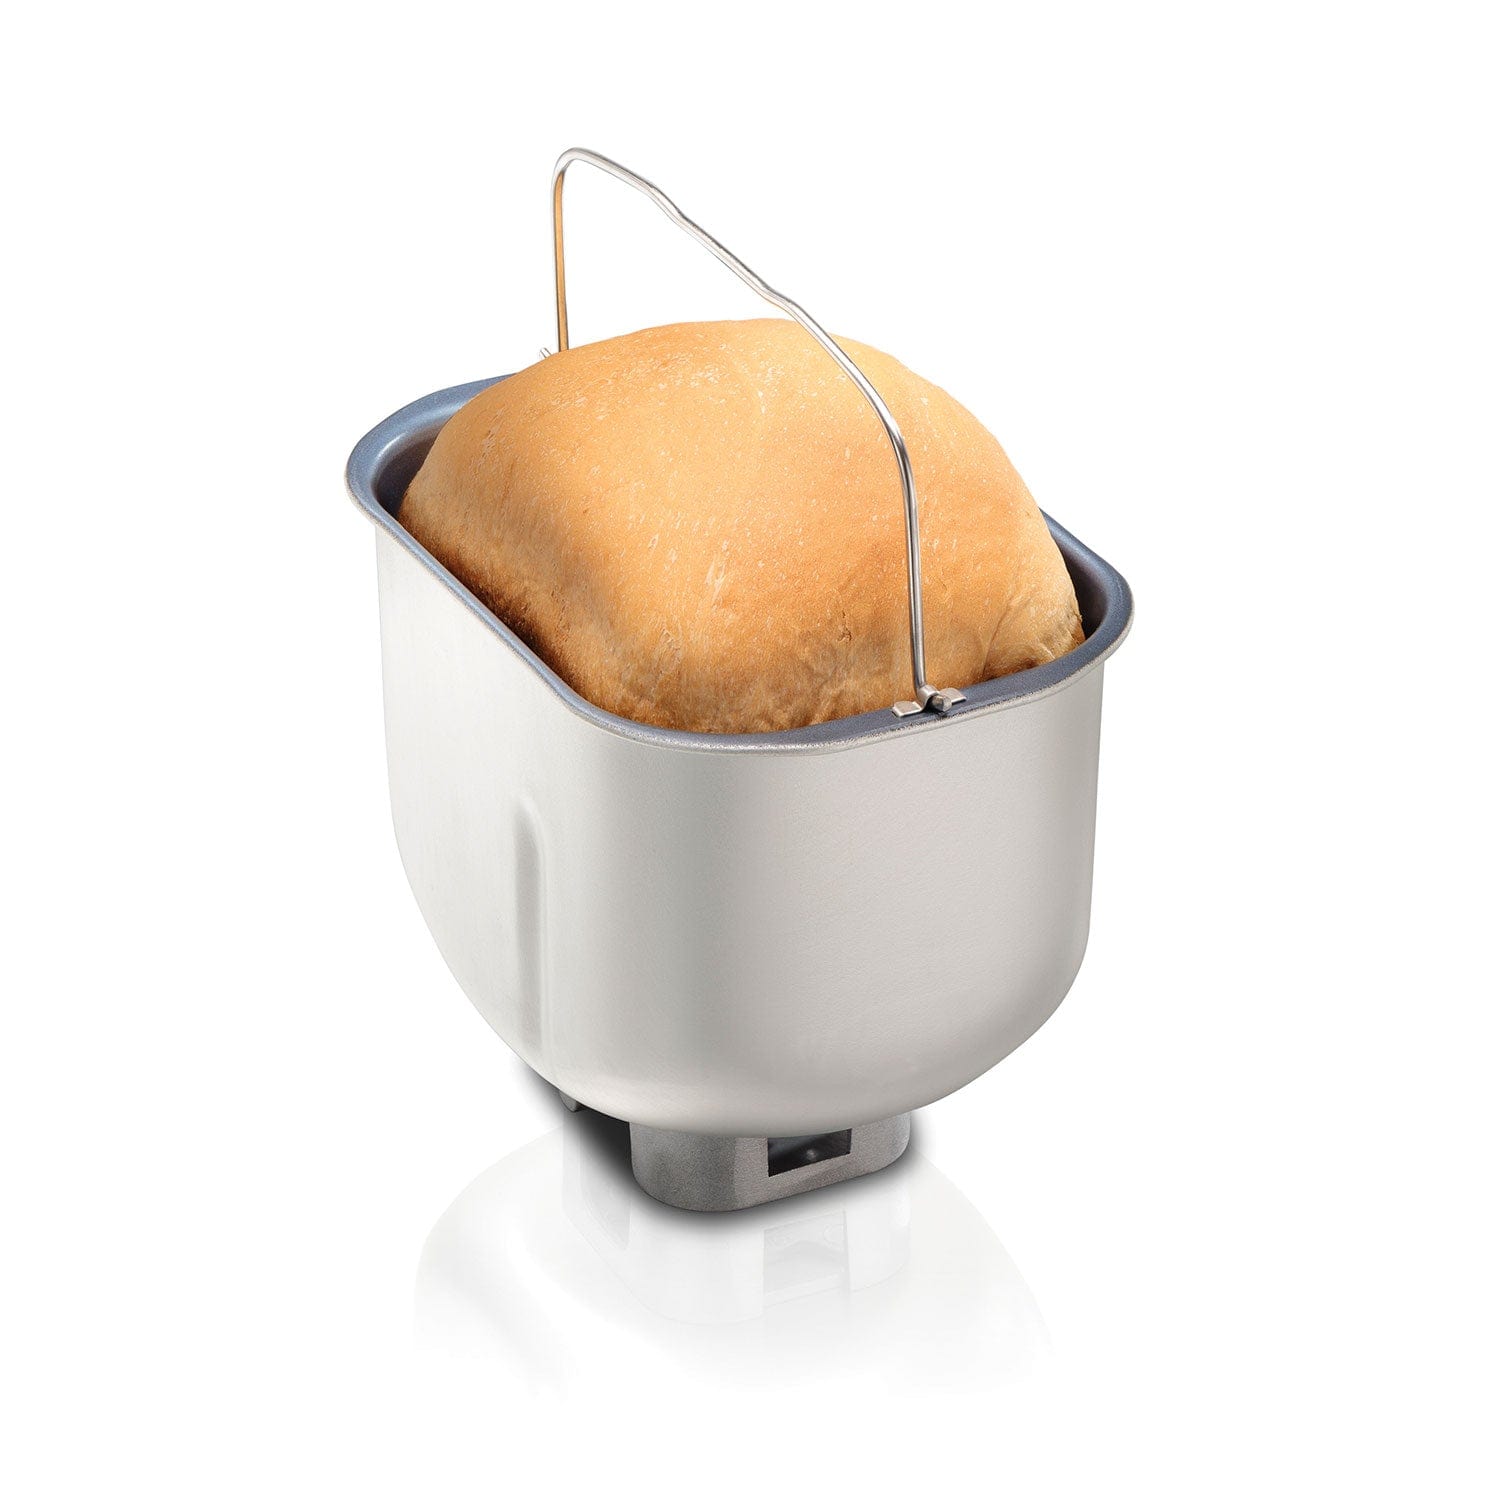 Hamilton Beach Replacement Bread Pan 990246600 - Out Of Stock